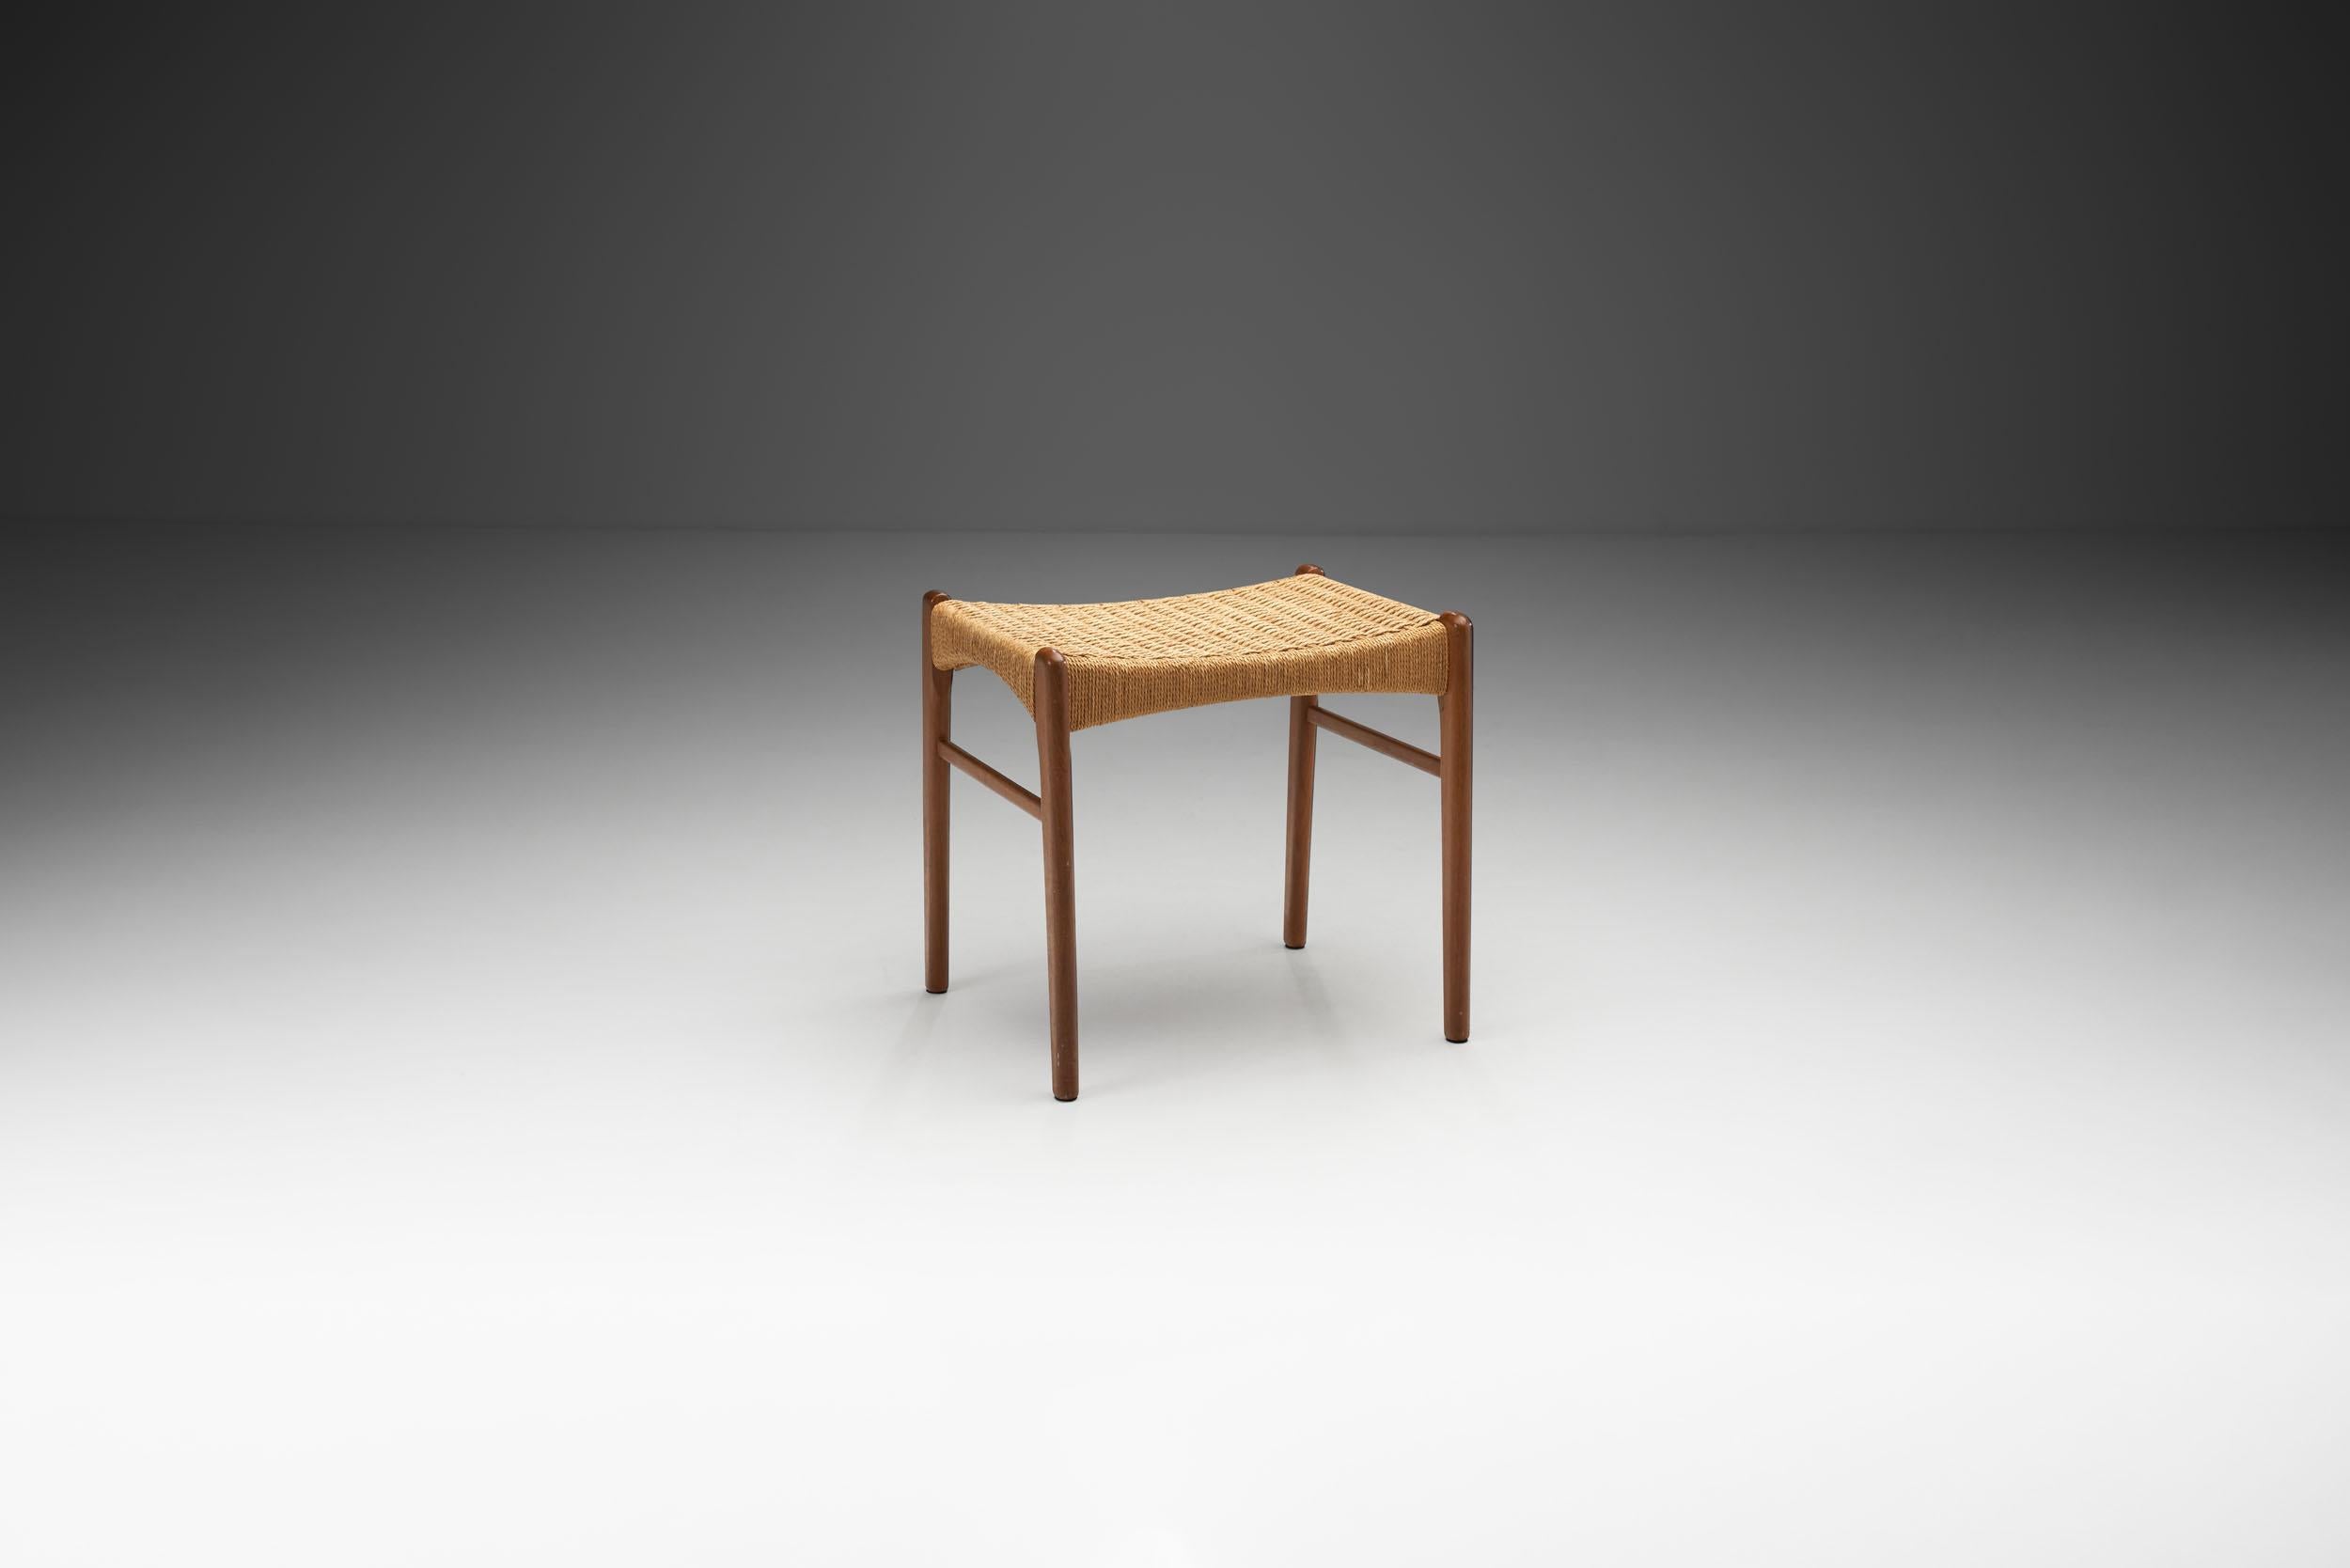 From Charlotte Perriand to Axel Einar Hjorth, stools have been staples in European design history. Modernist stools like this model, stem from one of the earliest forms of seating, the milking stool. With a highly functional history and modernist